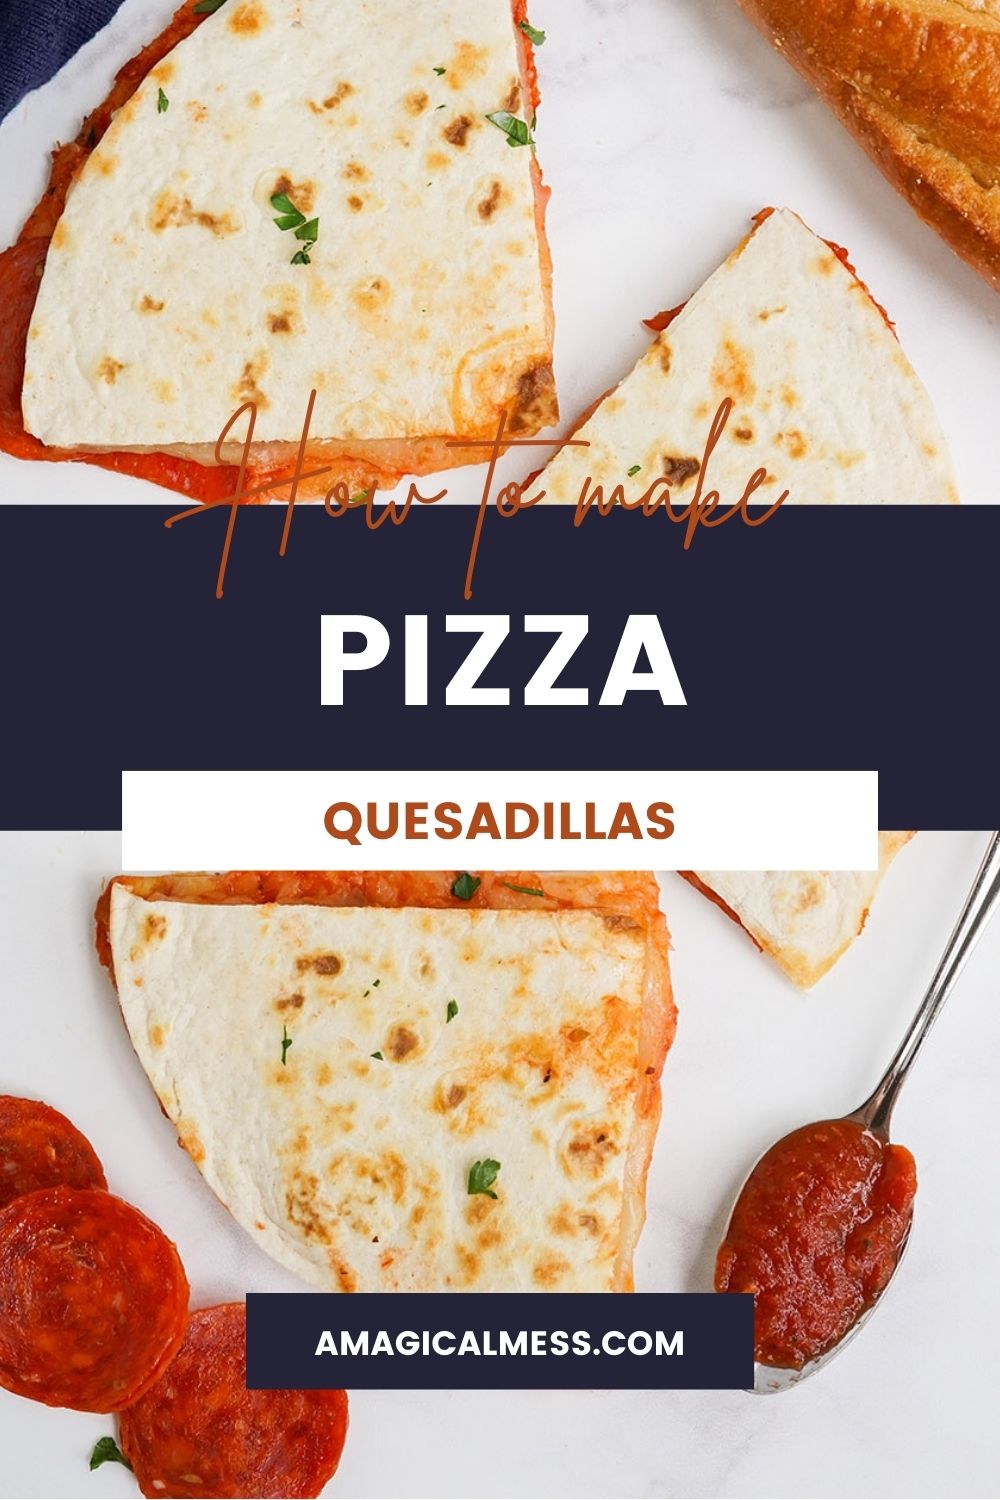 Pizza quesadillas on a table with a spoon full of sauce.